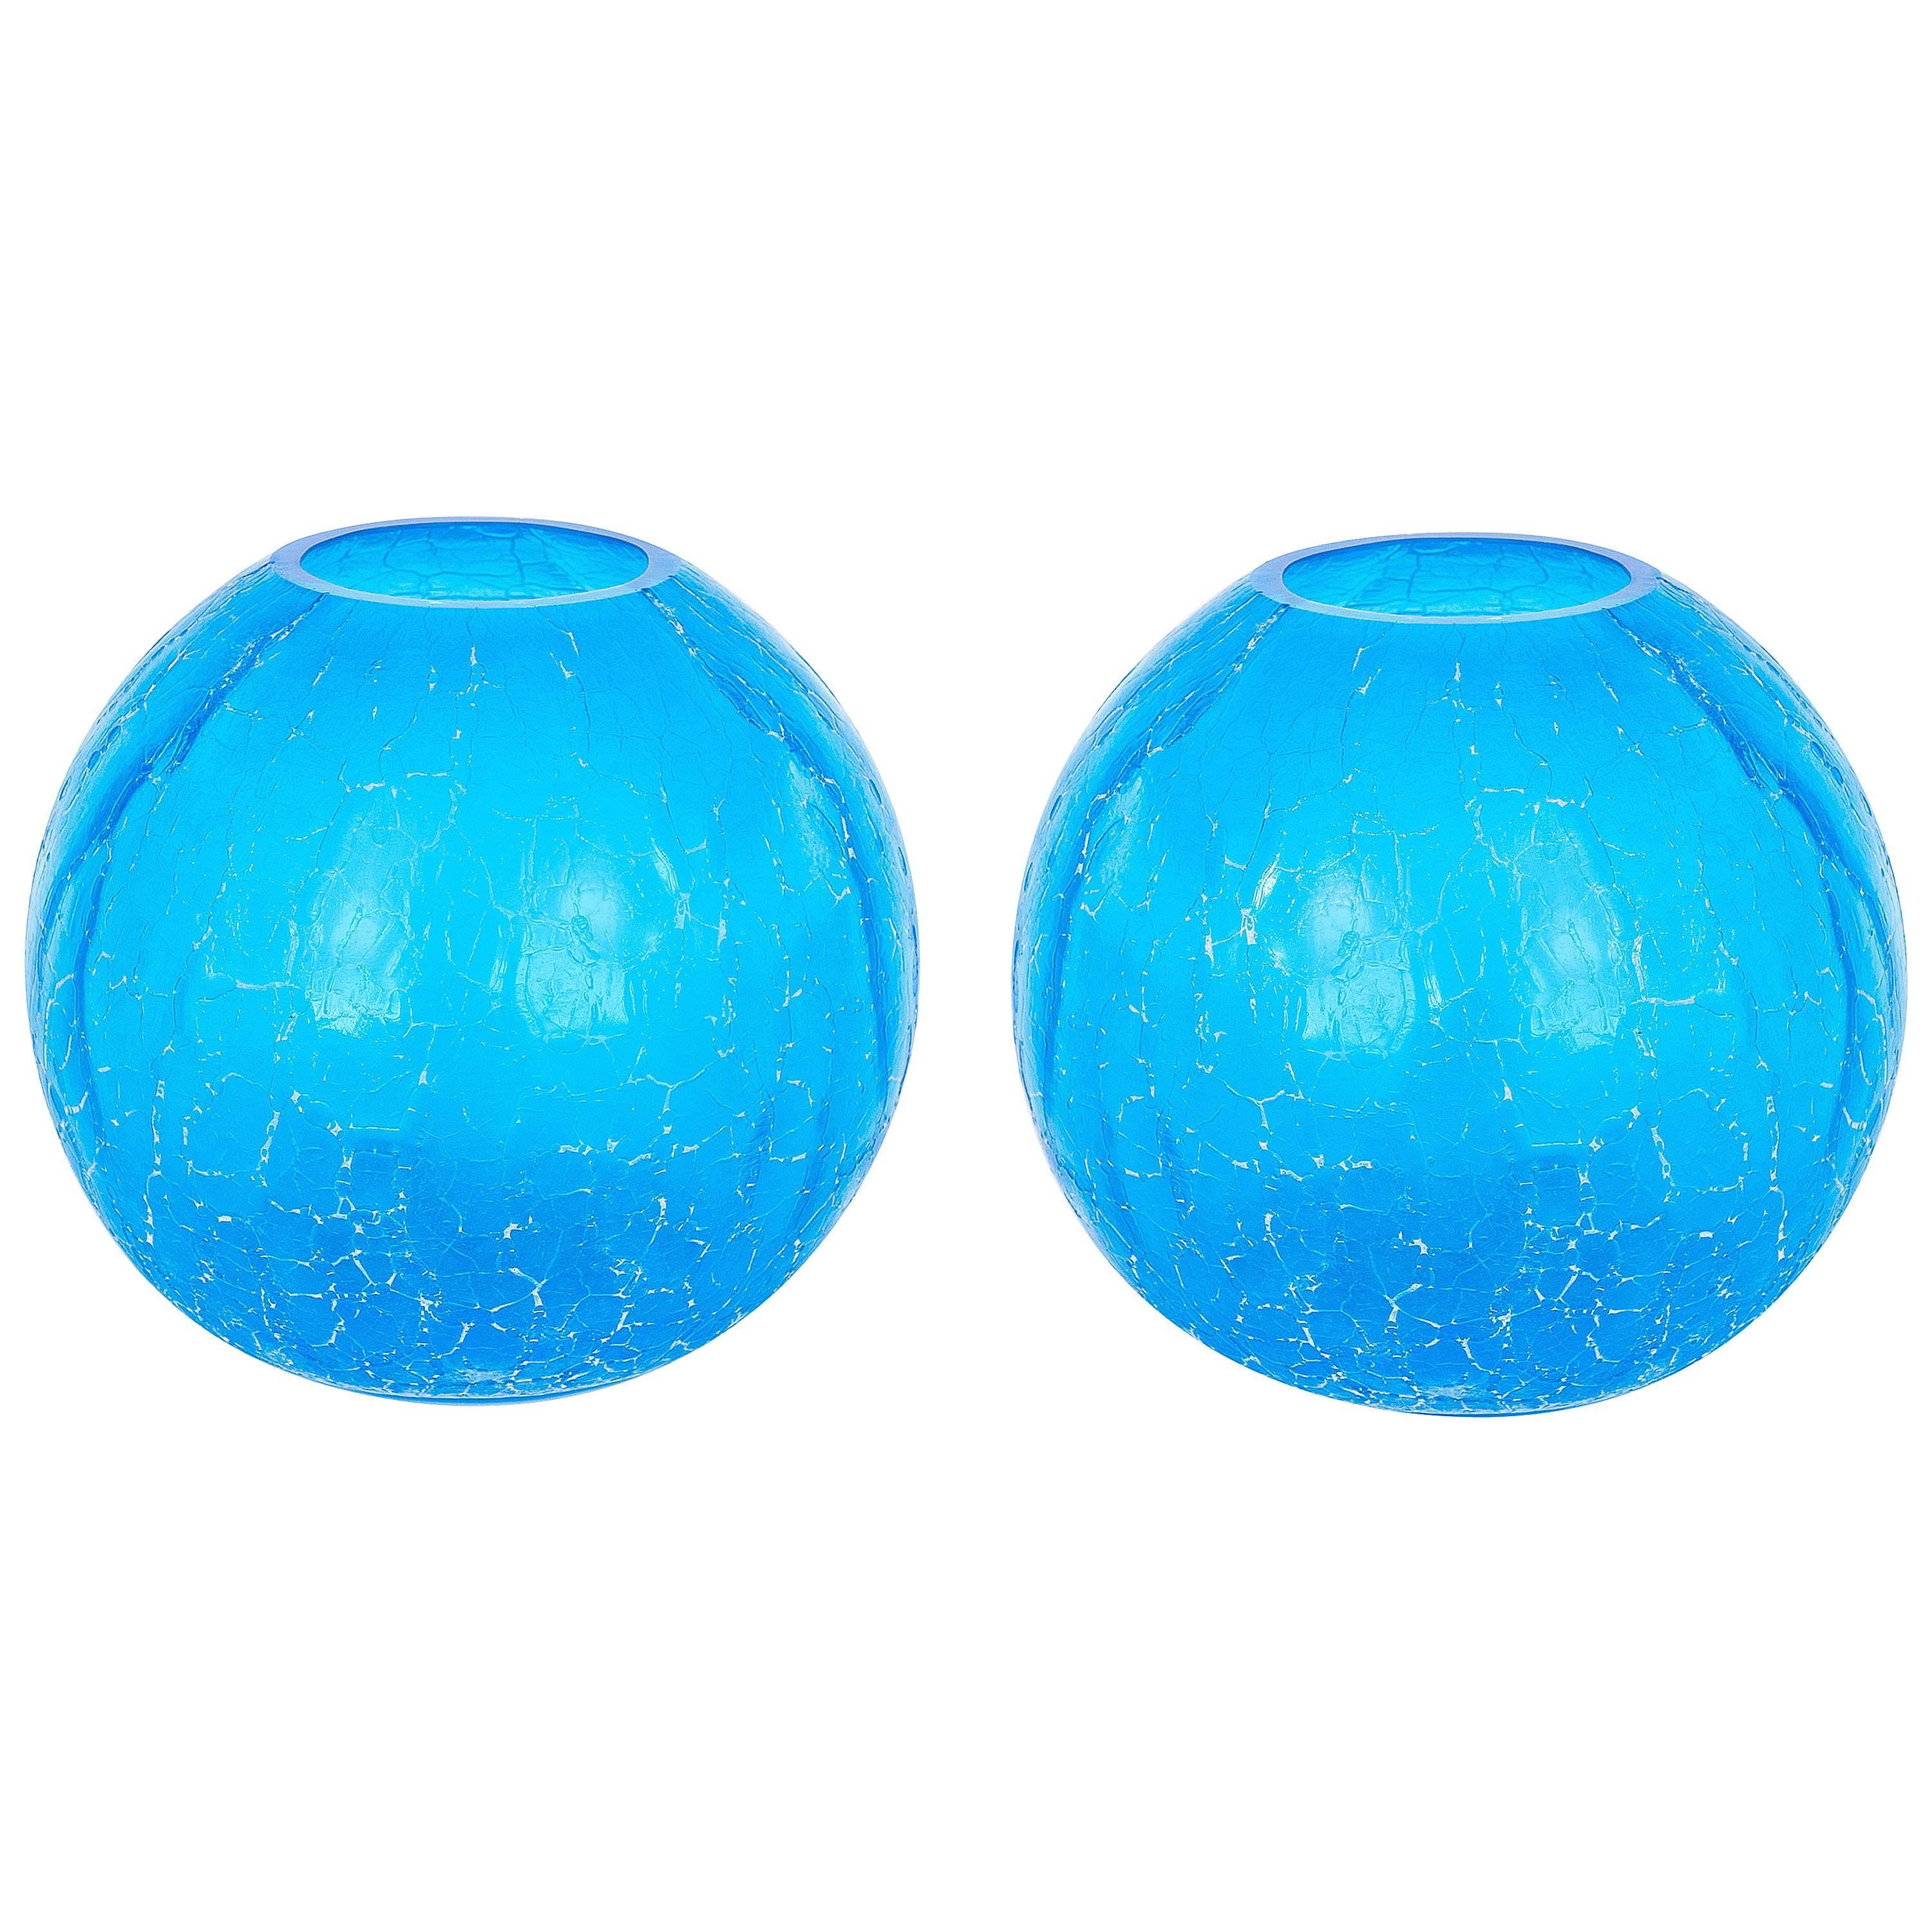 Pair of Sphere Vases in Italian Murano Blown Glass by Cenedese 1970s Italy For Sale